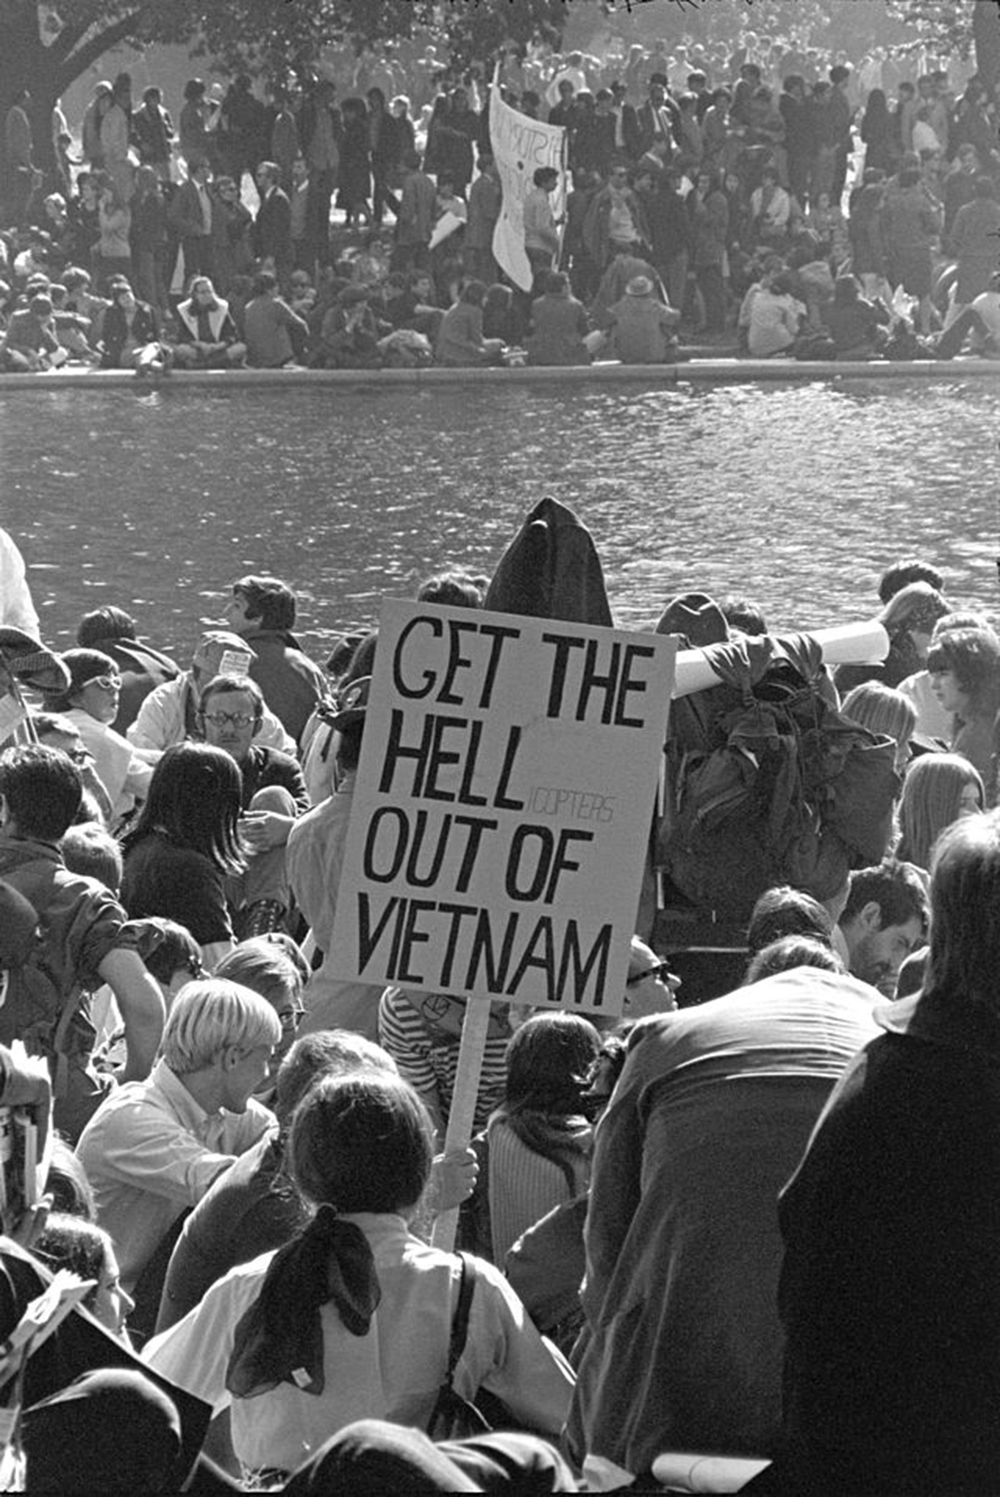 Photograph of Vietnam War protestors in Washington DC. A sign says "Get the Hell out of Vietnam!"